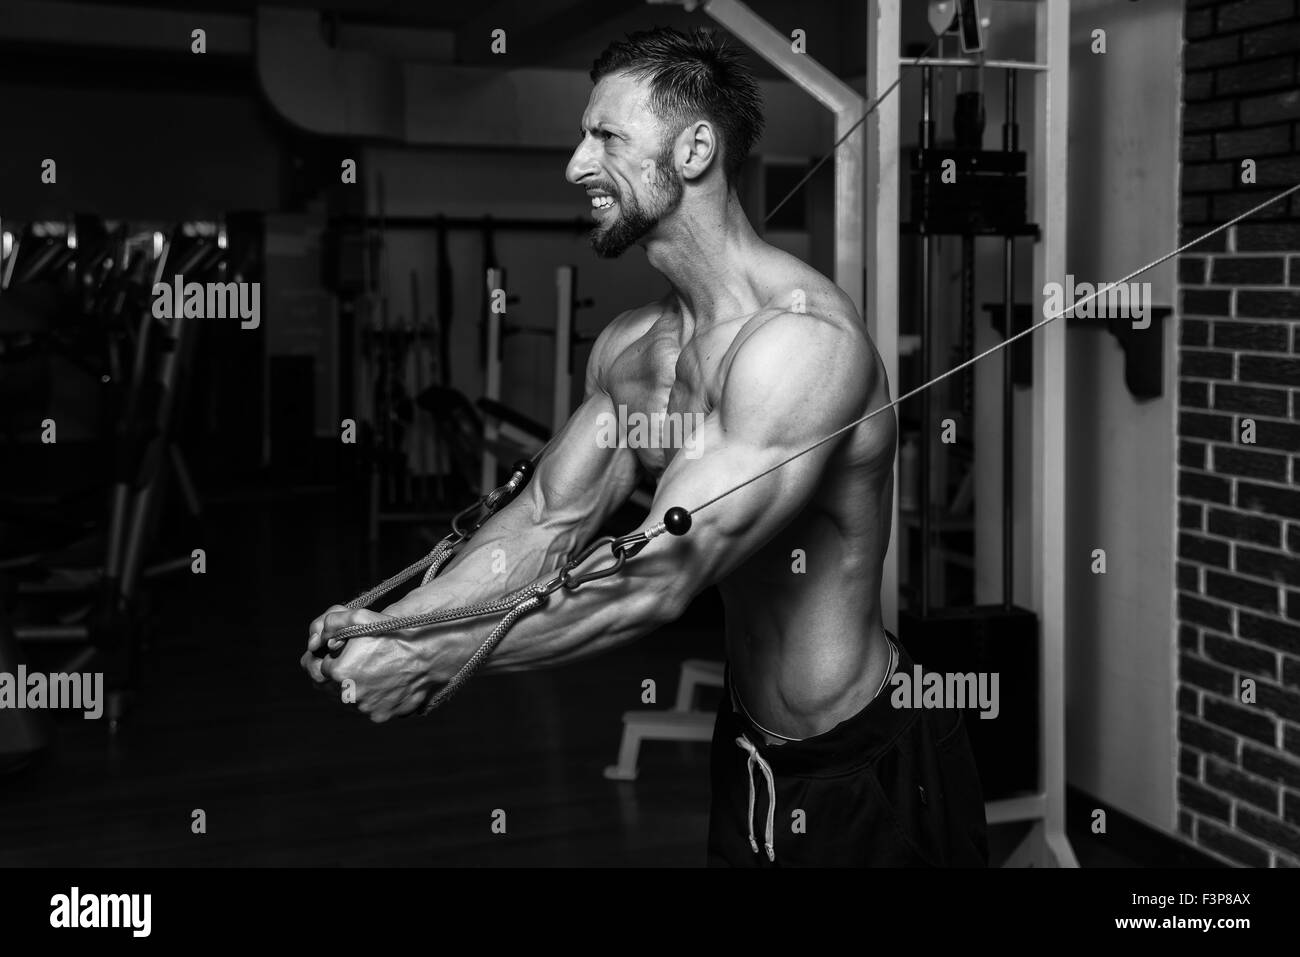 Bodybuilder Is Working On His Chest With Cable Crossover In A Dark Gym Stock Photo